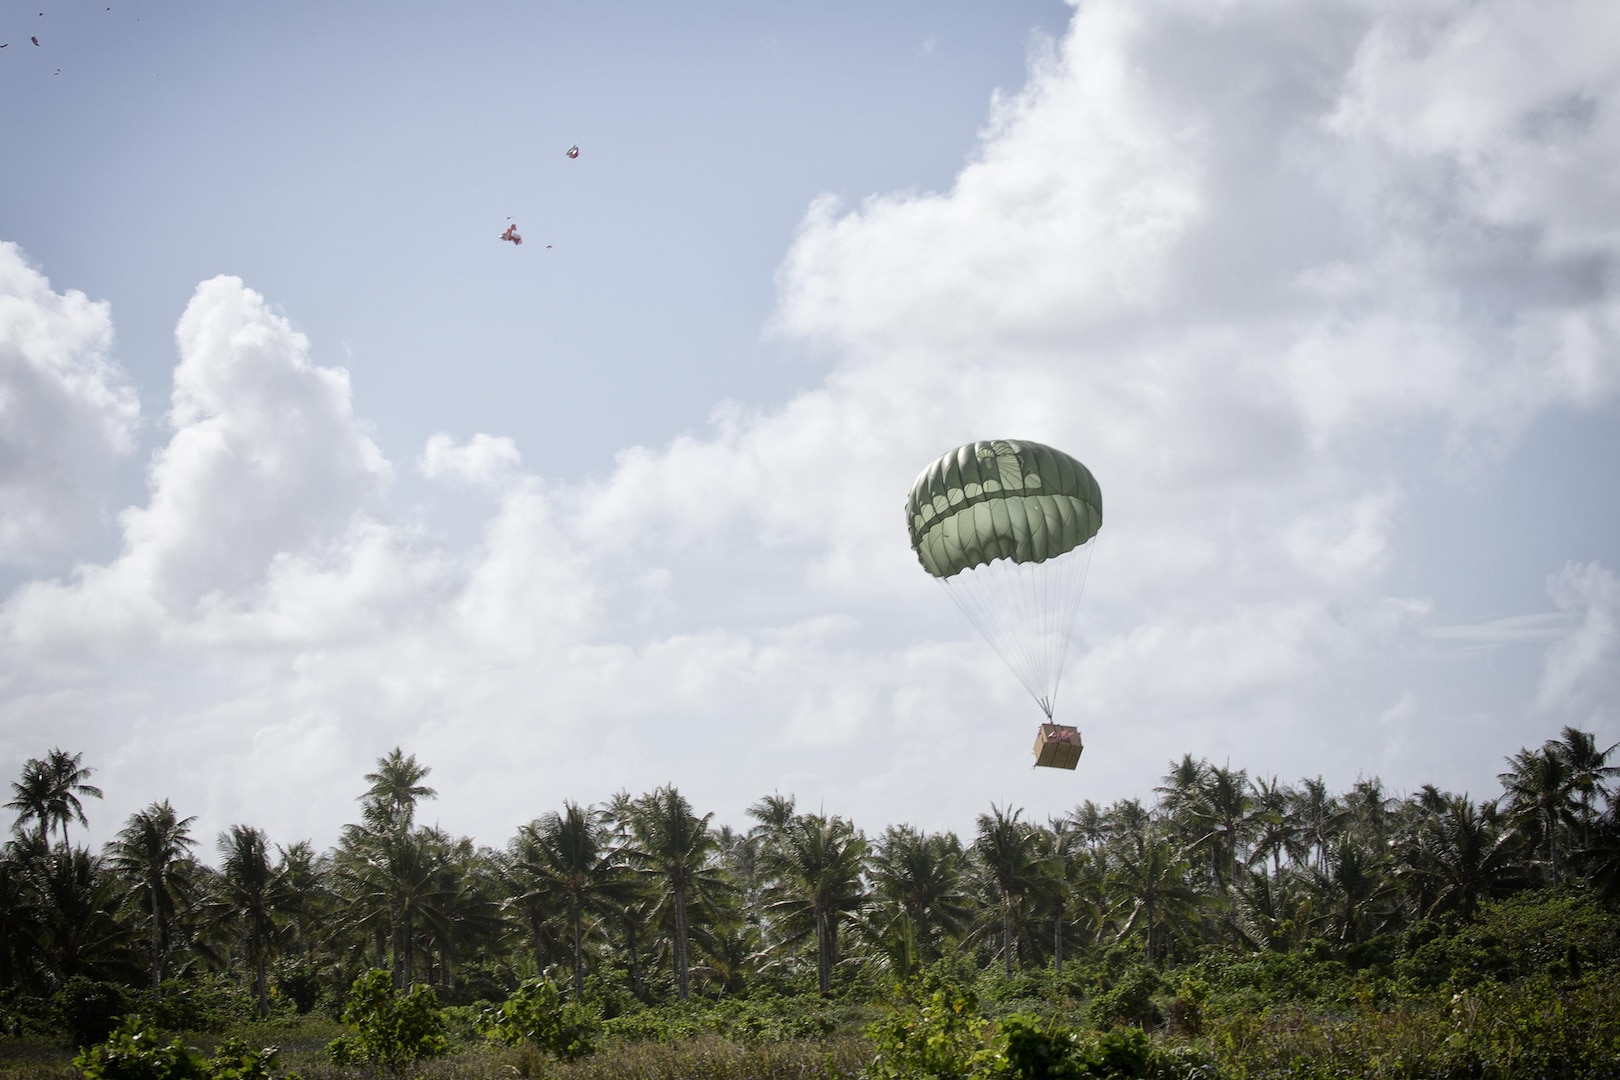 A low-cost, low-altitude bundle filled with donated goods and supplies drops on the island of Fais during Operation Christmas Drop 2015. Operation Christmas Drop is the Department of Defense's longest running humanitarian airdrop mission. This year marks the first ever trilateral Operation Christmas Drop where the U.S. Air Force, Japan Air Self-Defense Force and the Royal Australian Air Force work together to provide critical supplies to 56 Micronesian islands. (U.S. Air Force photo by Osakabe Yasuo/Released)